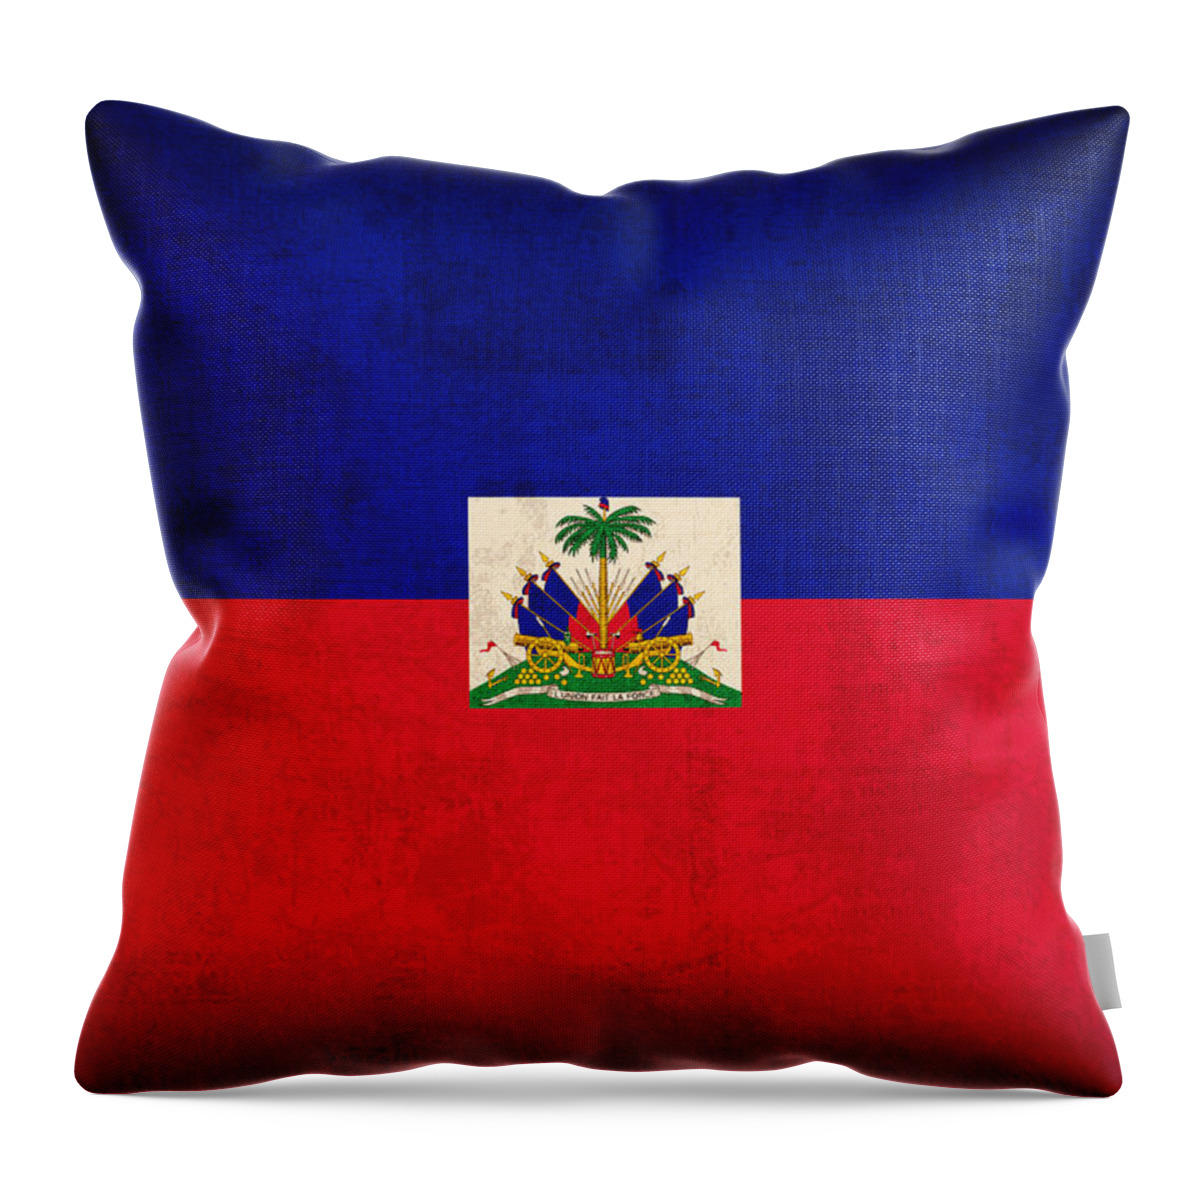 Haiti Throw Pillow featuring the mixed media Haiti Flag Vintage Distressed Finish by Design Turnpike